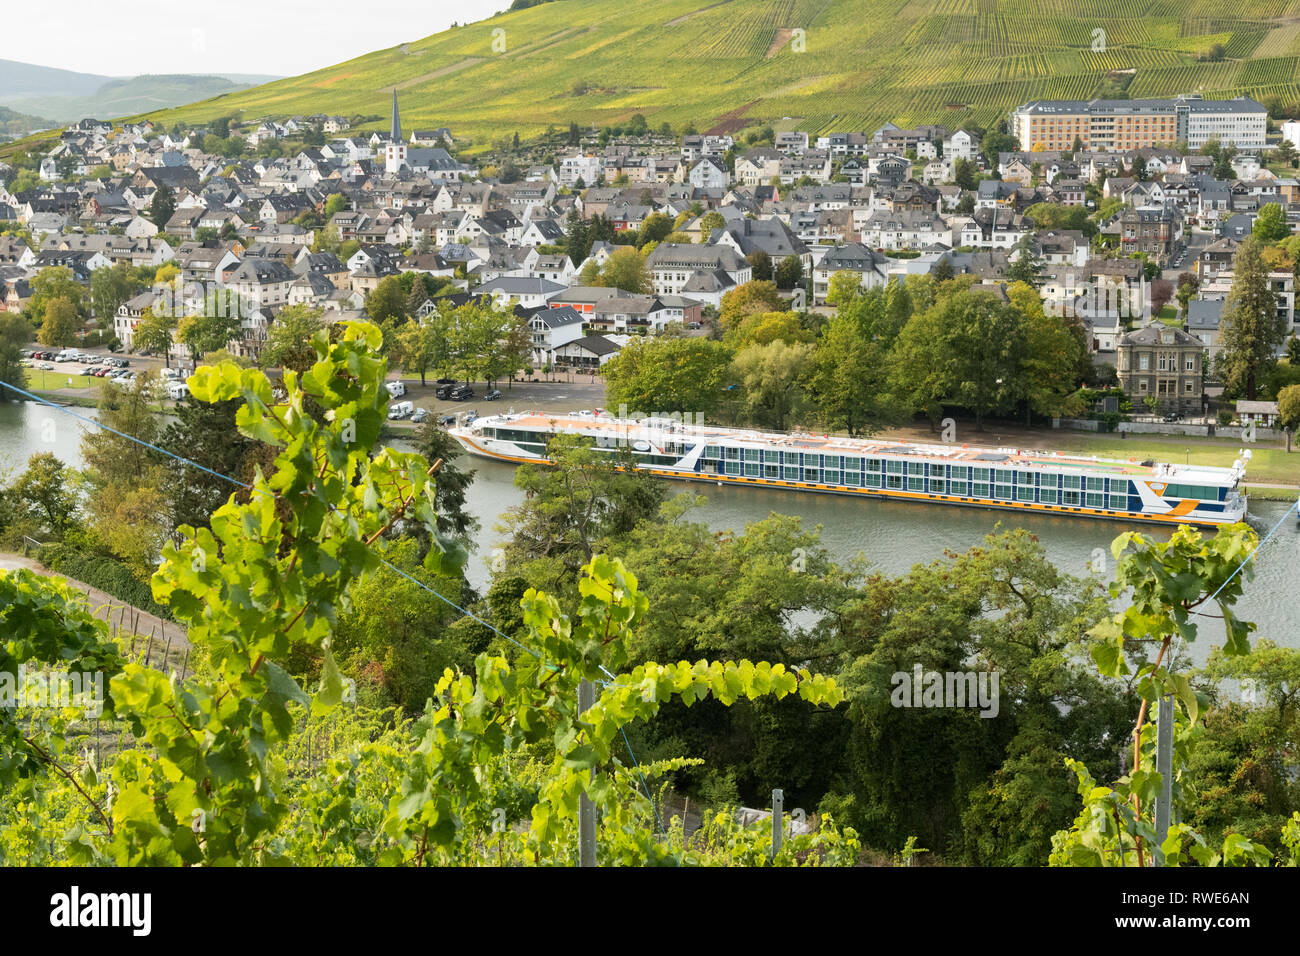 Moselle Valley River Cruise ship Vista Star moored at Bernkastel-Kues, a winegrowing centre on the Middle Moselle, Germany Stock Photo